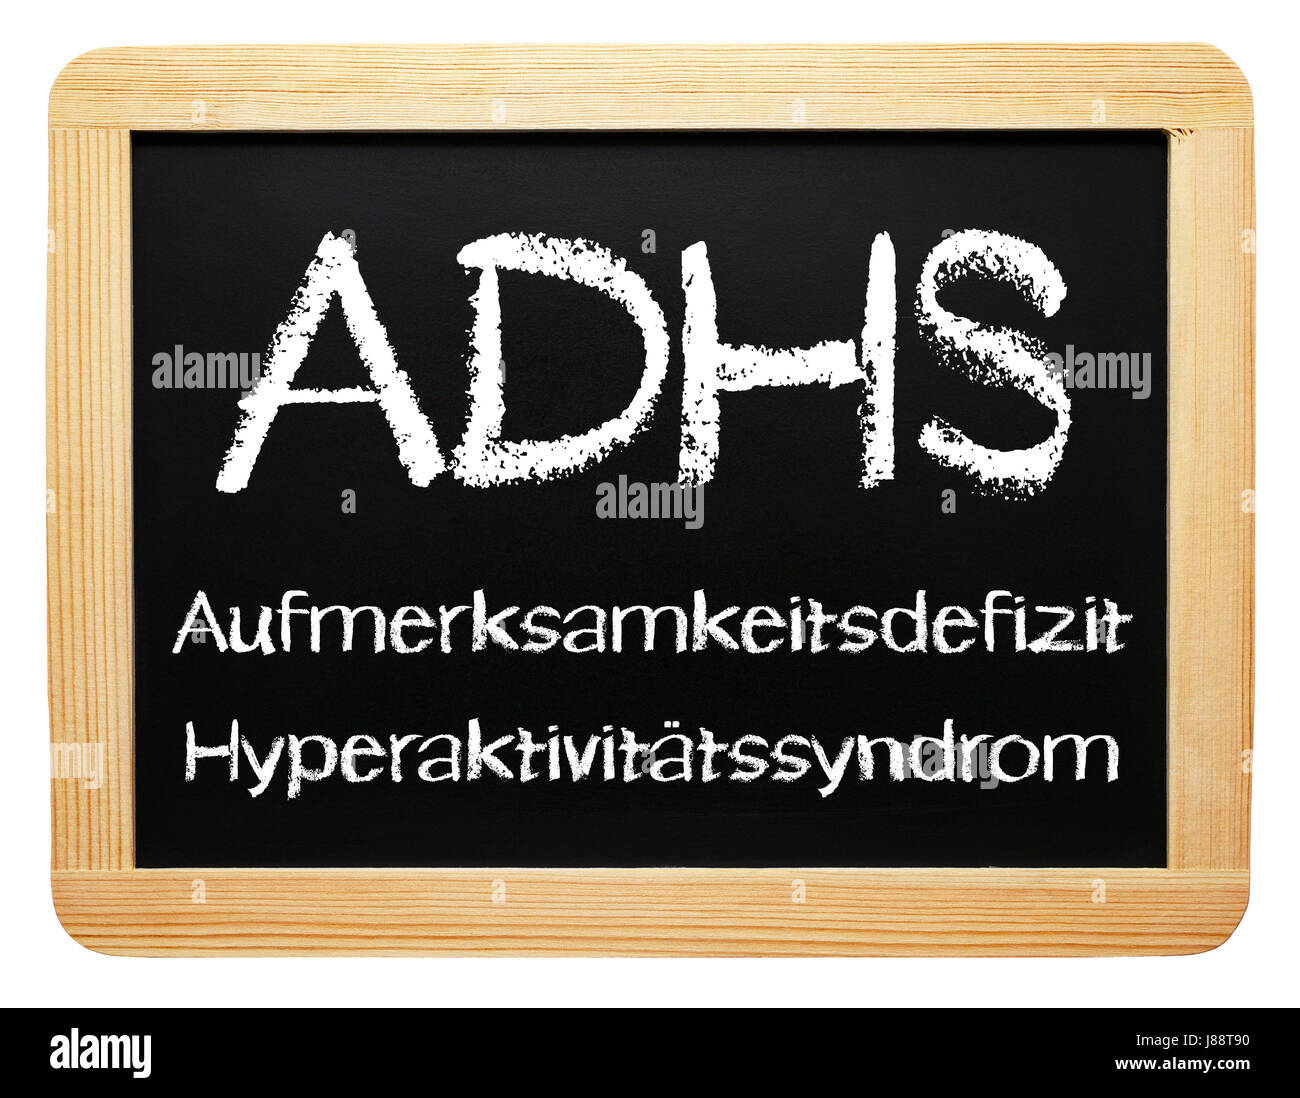 adhd - attention deficit hyperactivity disorder Stock Photo